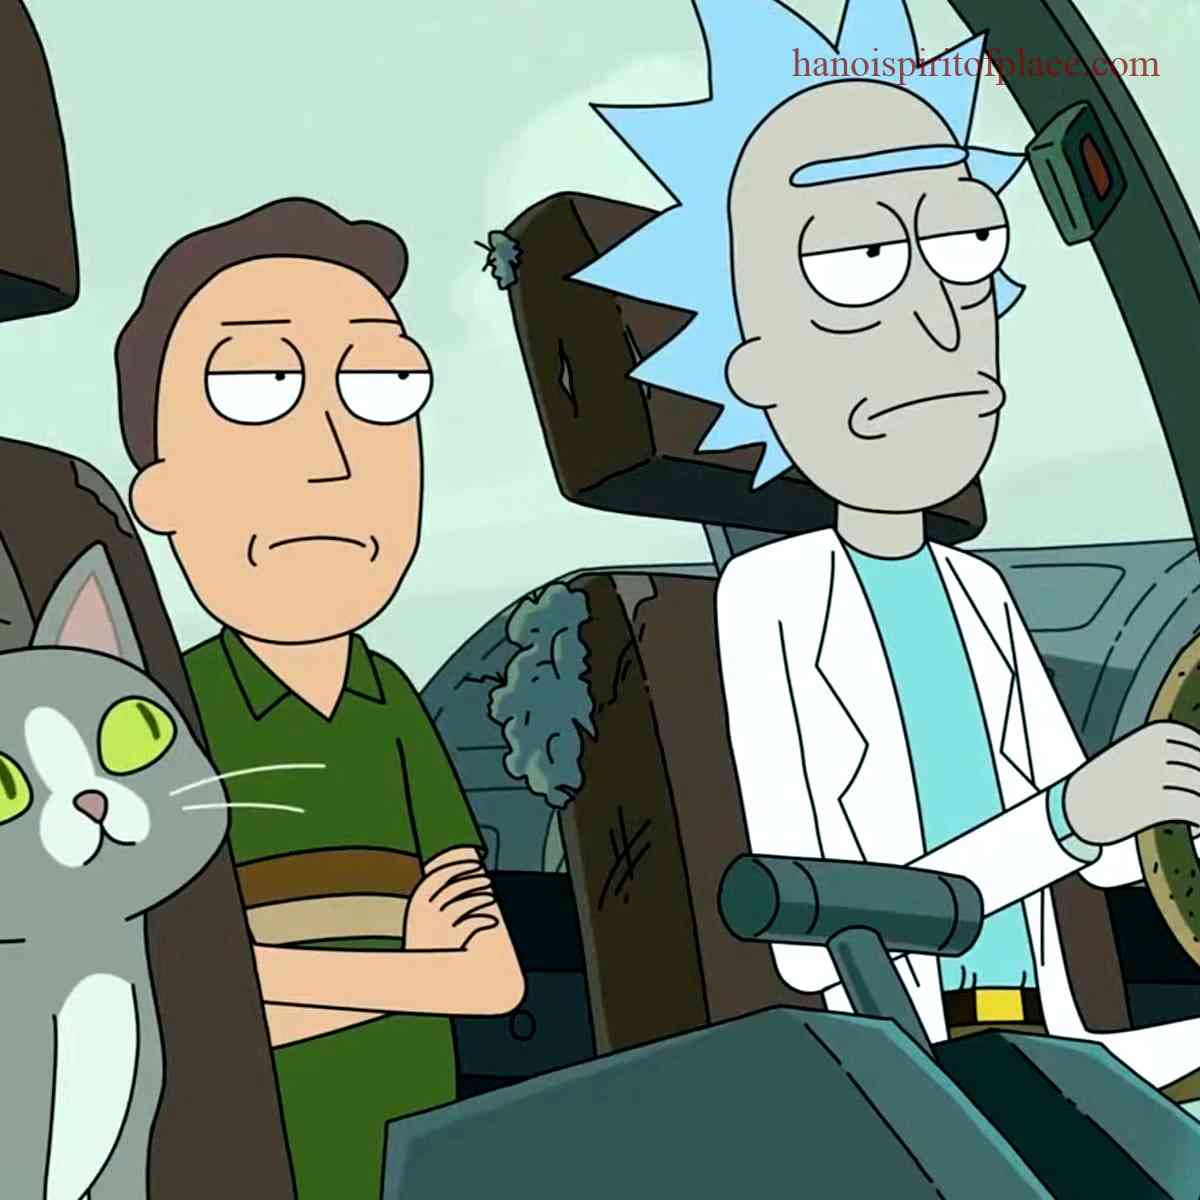 Reddit User Discussions on the Absence of Rick and Morty Season 5 on Netflix